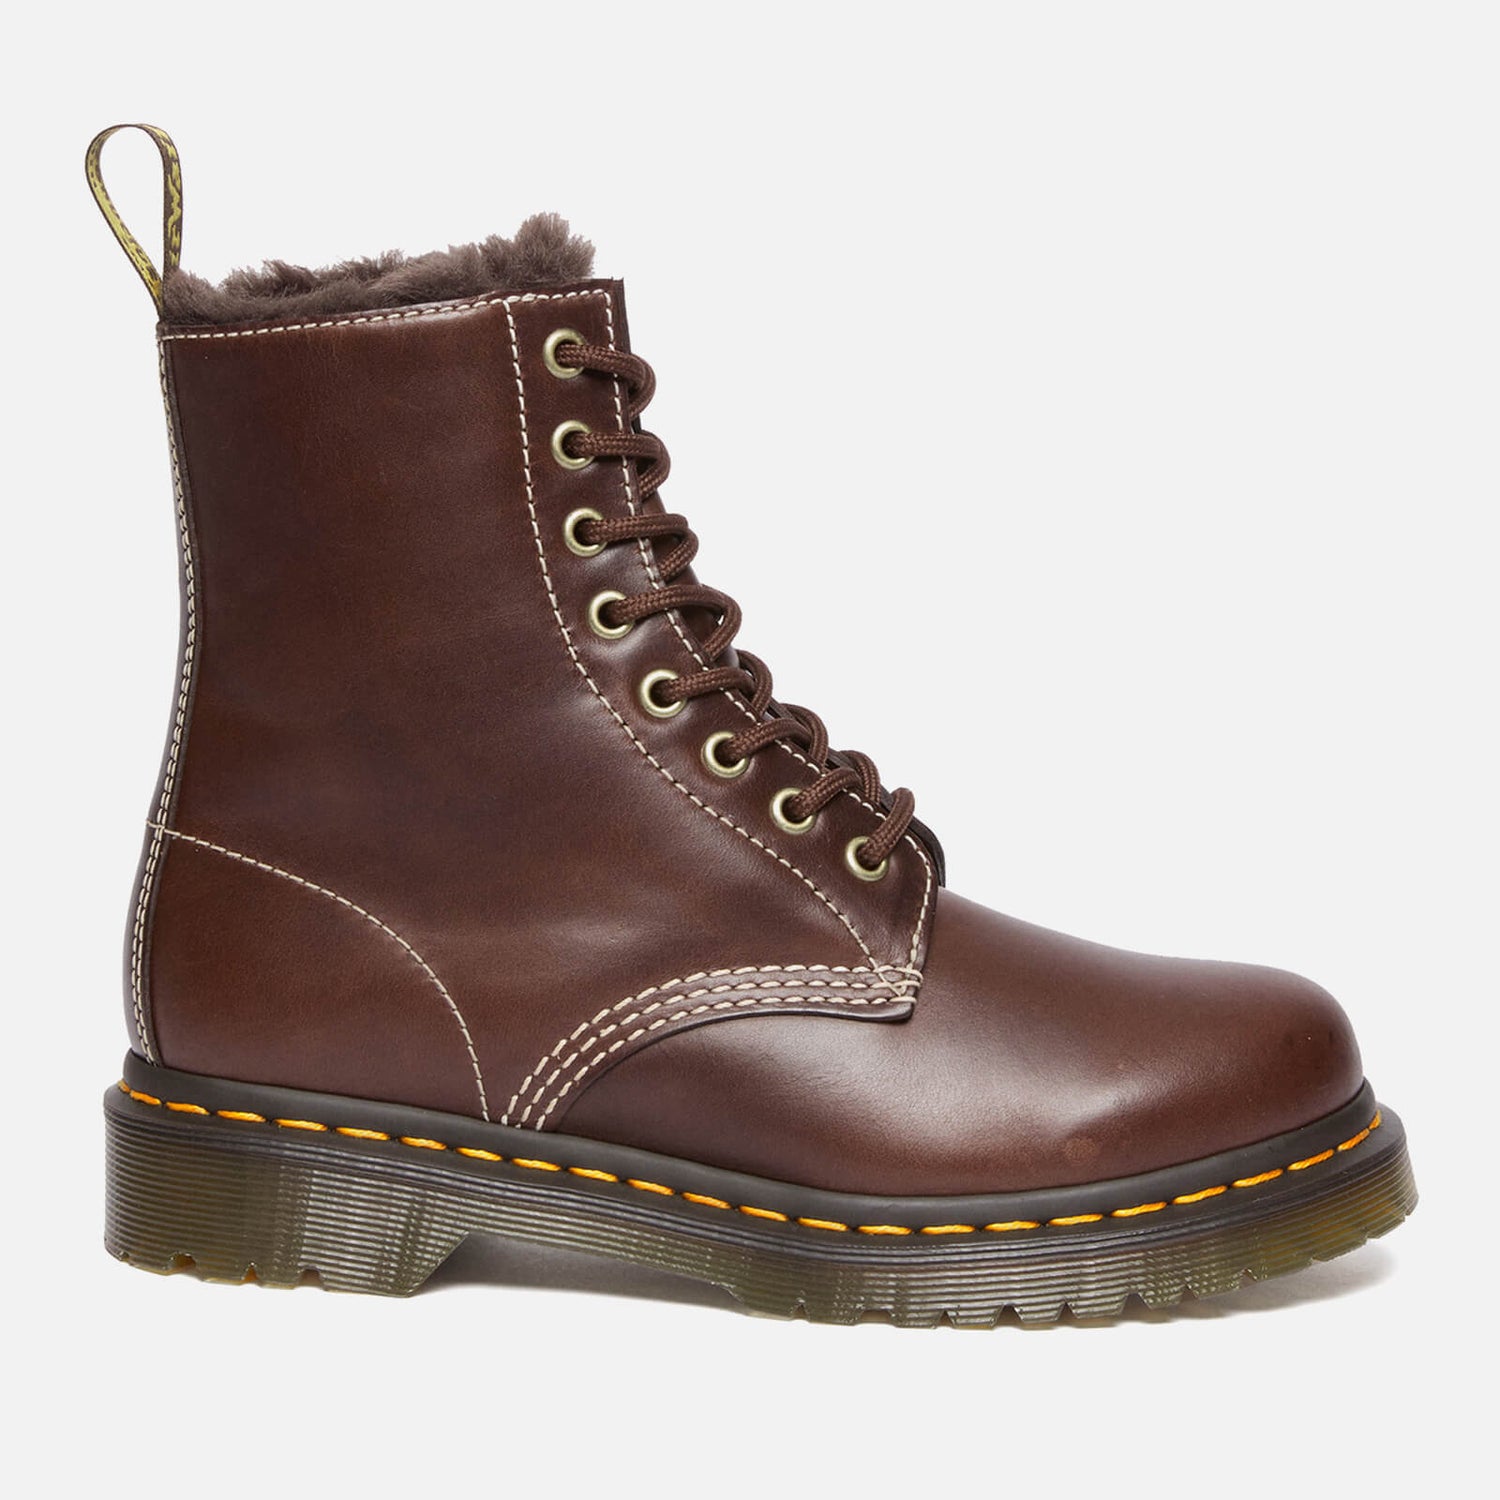 Dr. Martens Women's 1460 Serena Leather 8-Eye Boots - UK 3